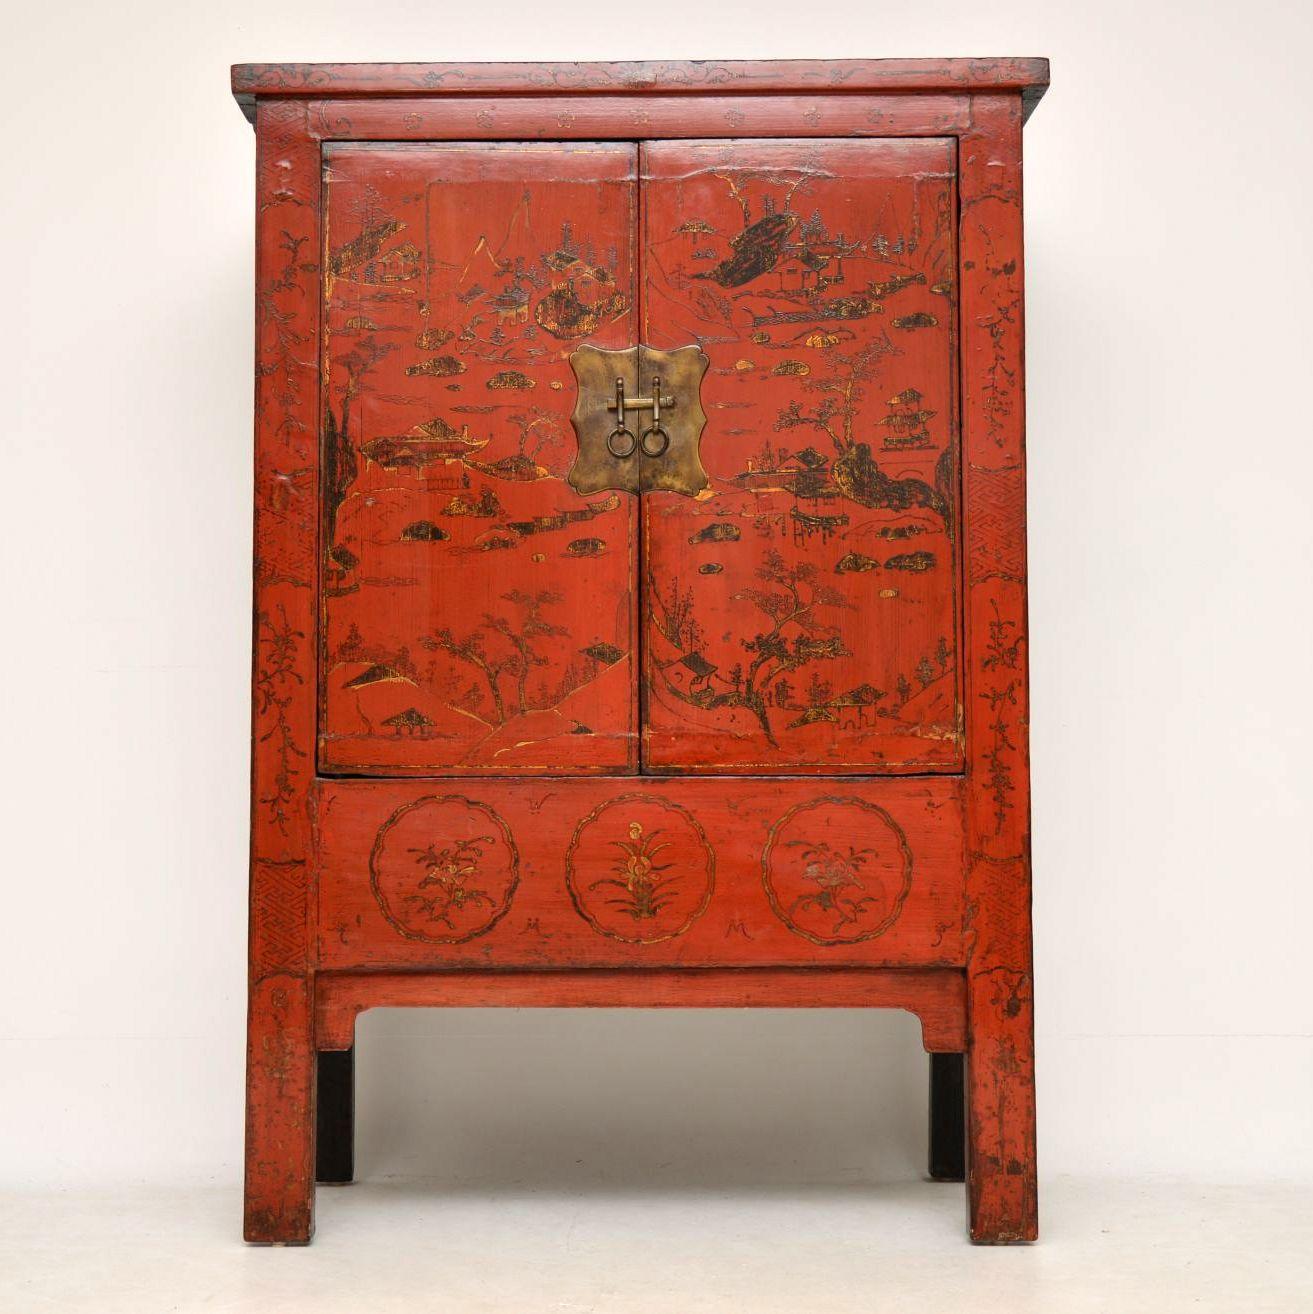 This is a very rare Chinese antique lacquered wedding cabinet in good original condition. It’s a very old piece. I’m no expert on antique Chinese furniture, but it looks to me as though it could be 18th century, otherwise it’s 19th century. All the